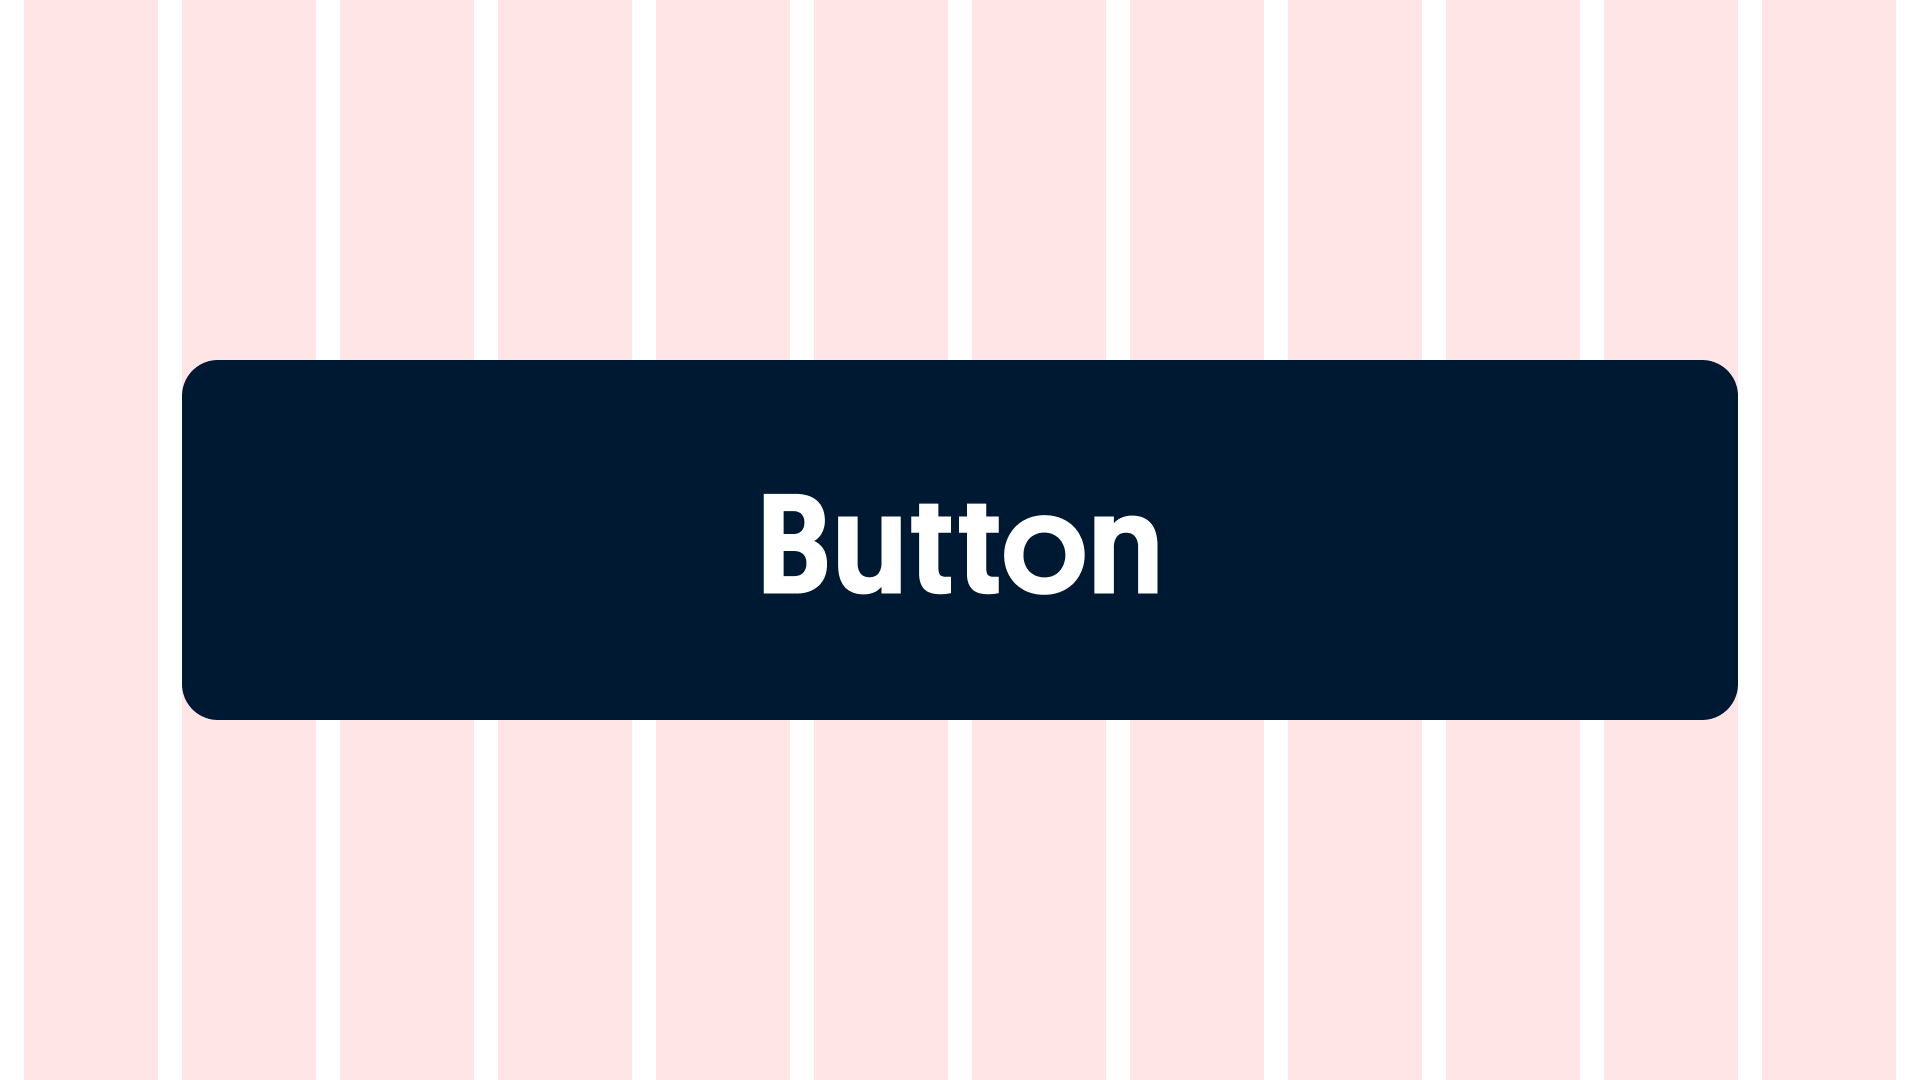 Button on grid system